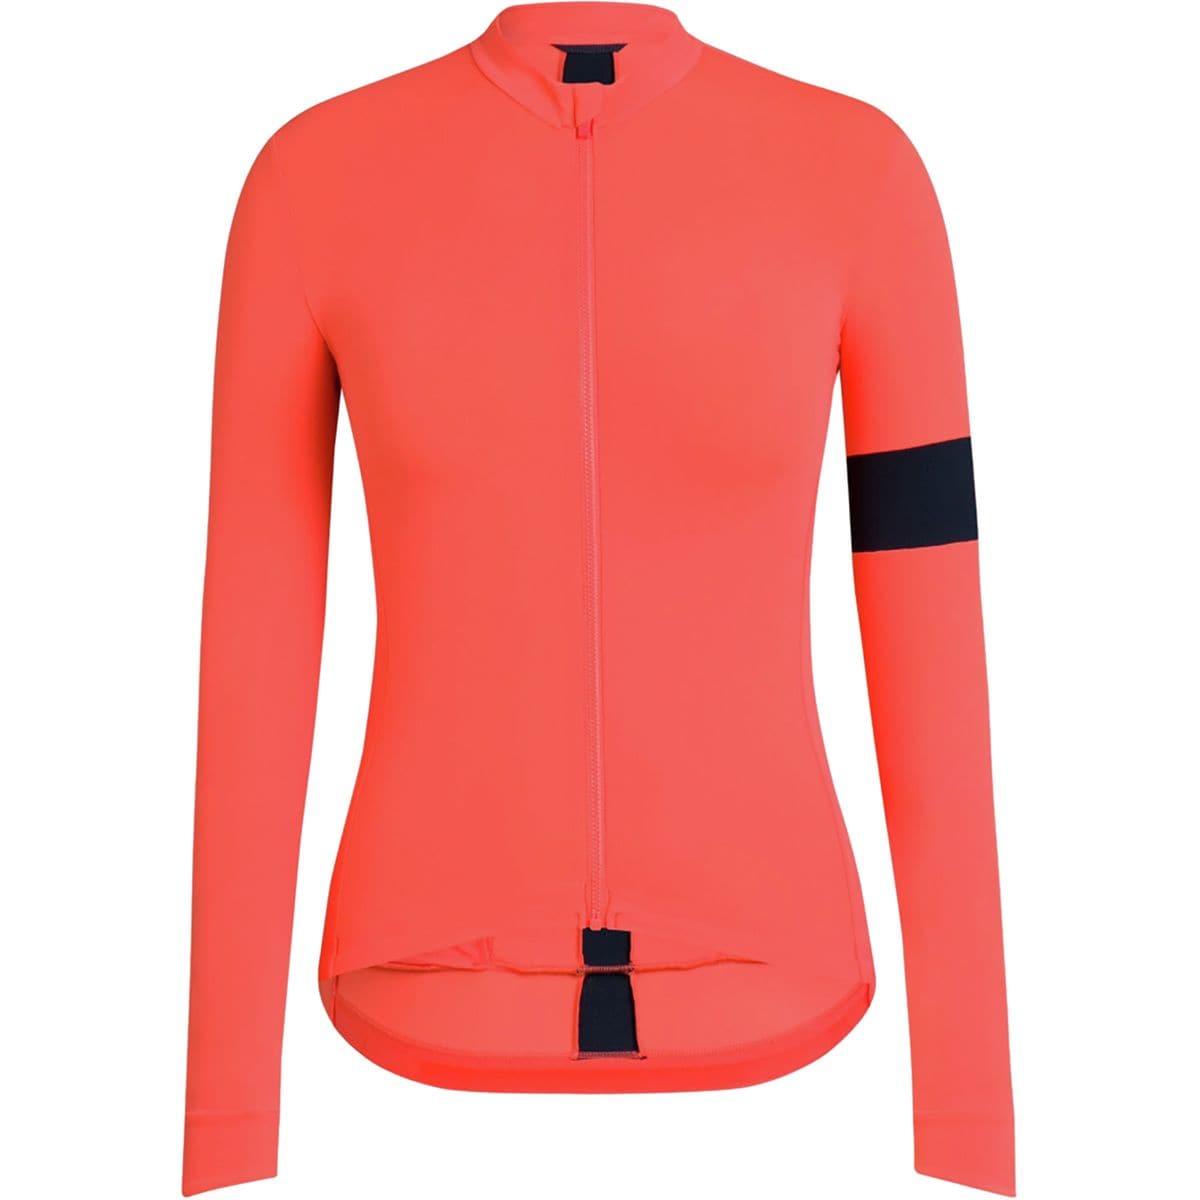 Rapha Souplesse Thermal Jersey - Women's